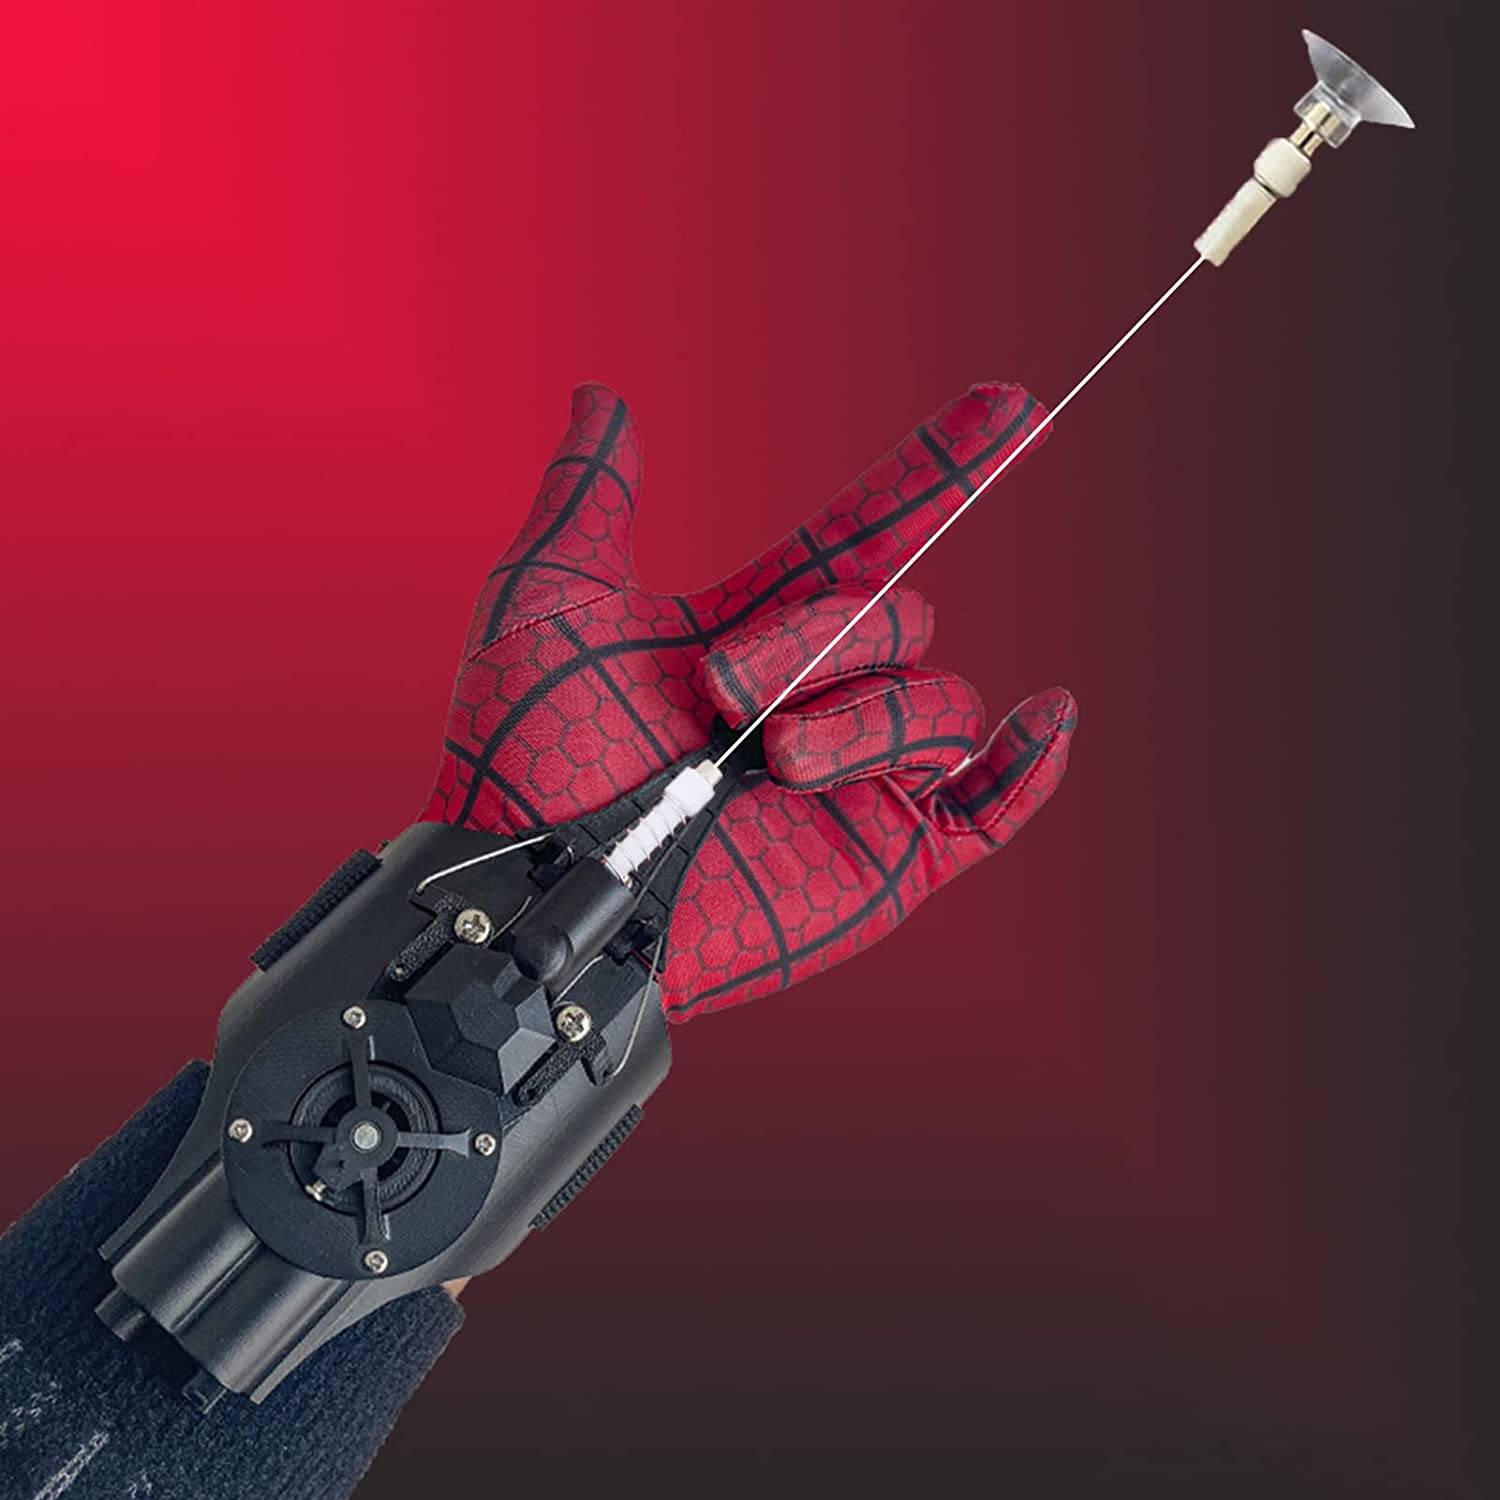 the amazing spider man web shooters instructions